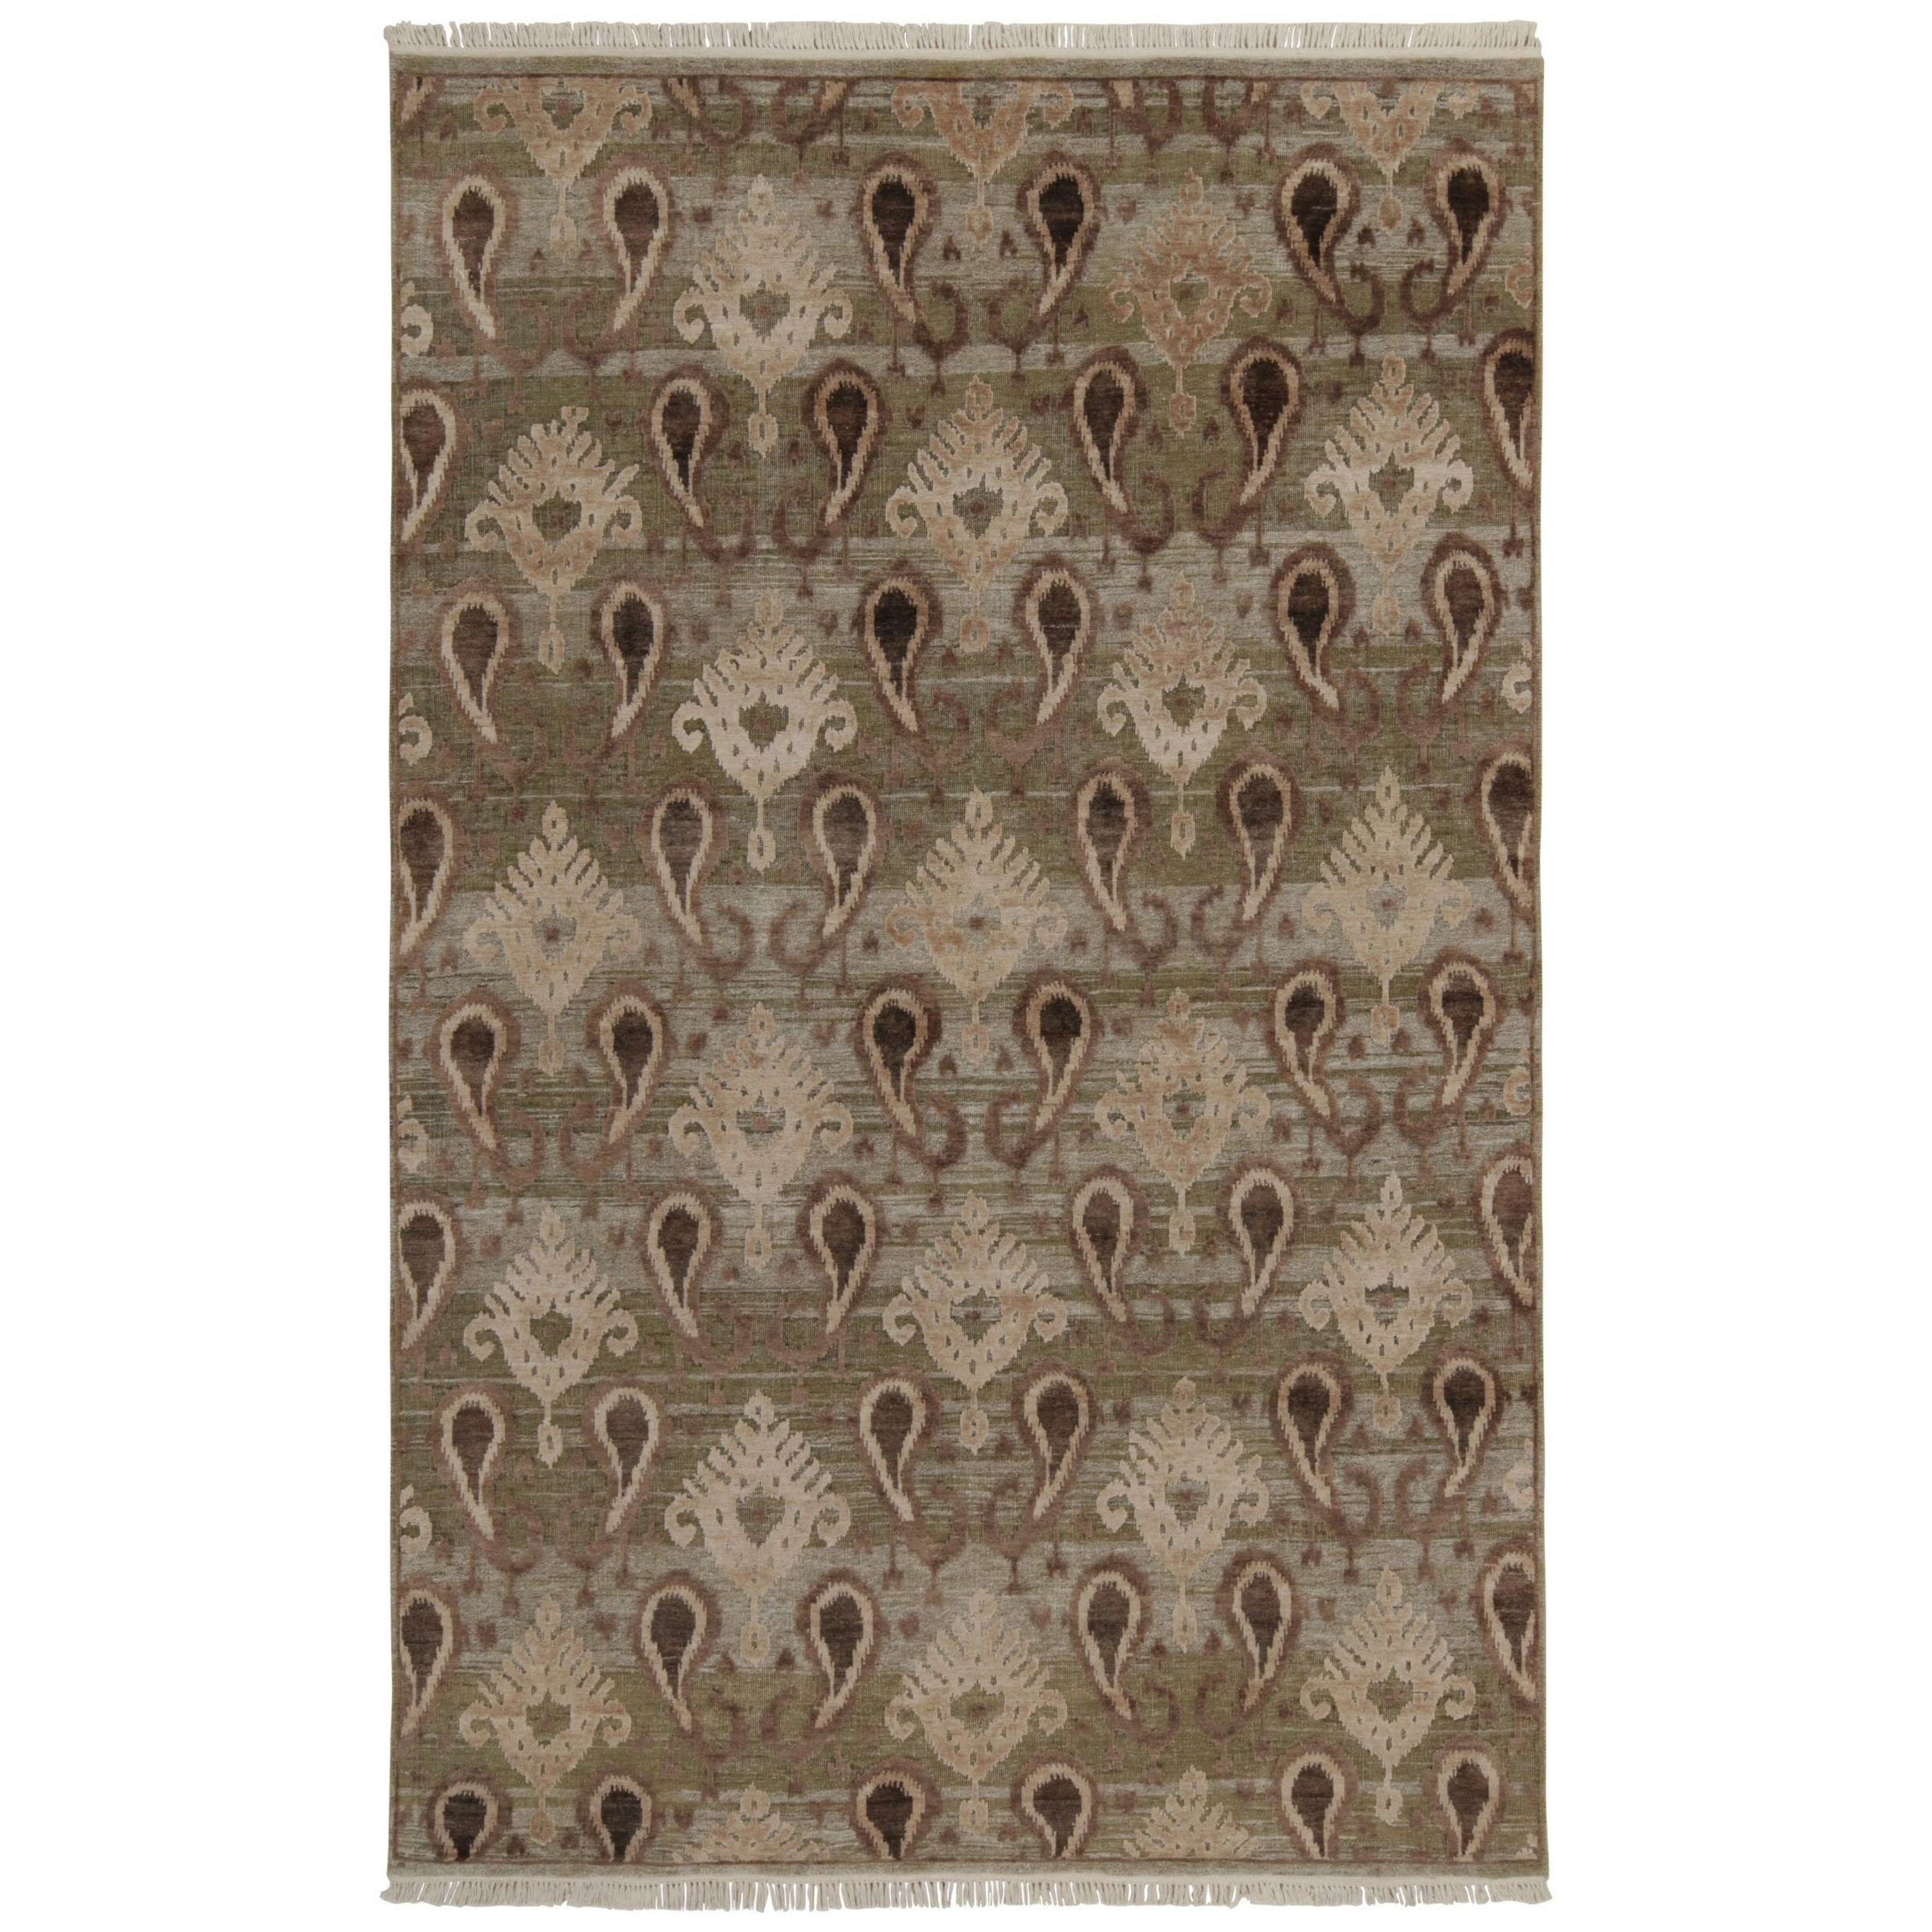 Rug & Kilim’s Ikats Style Rug in Green With Beige-Brown Paisley Floral Patterns